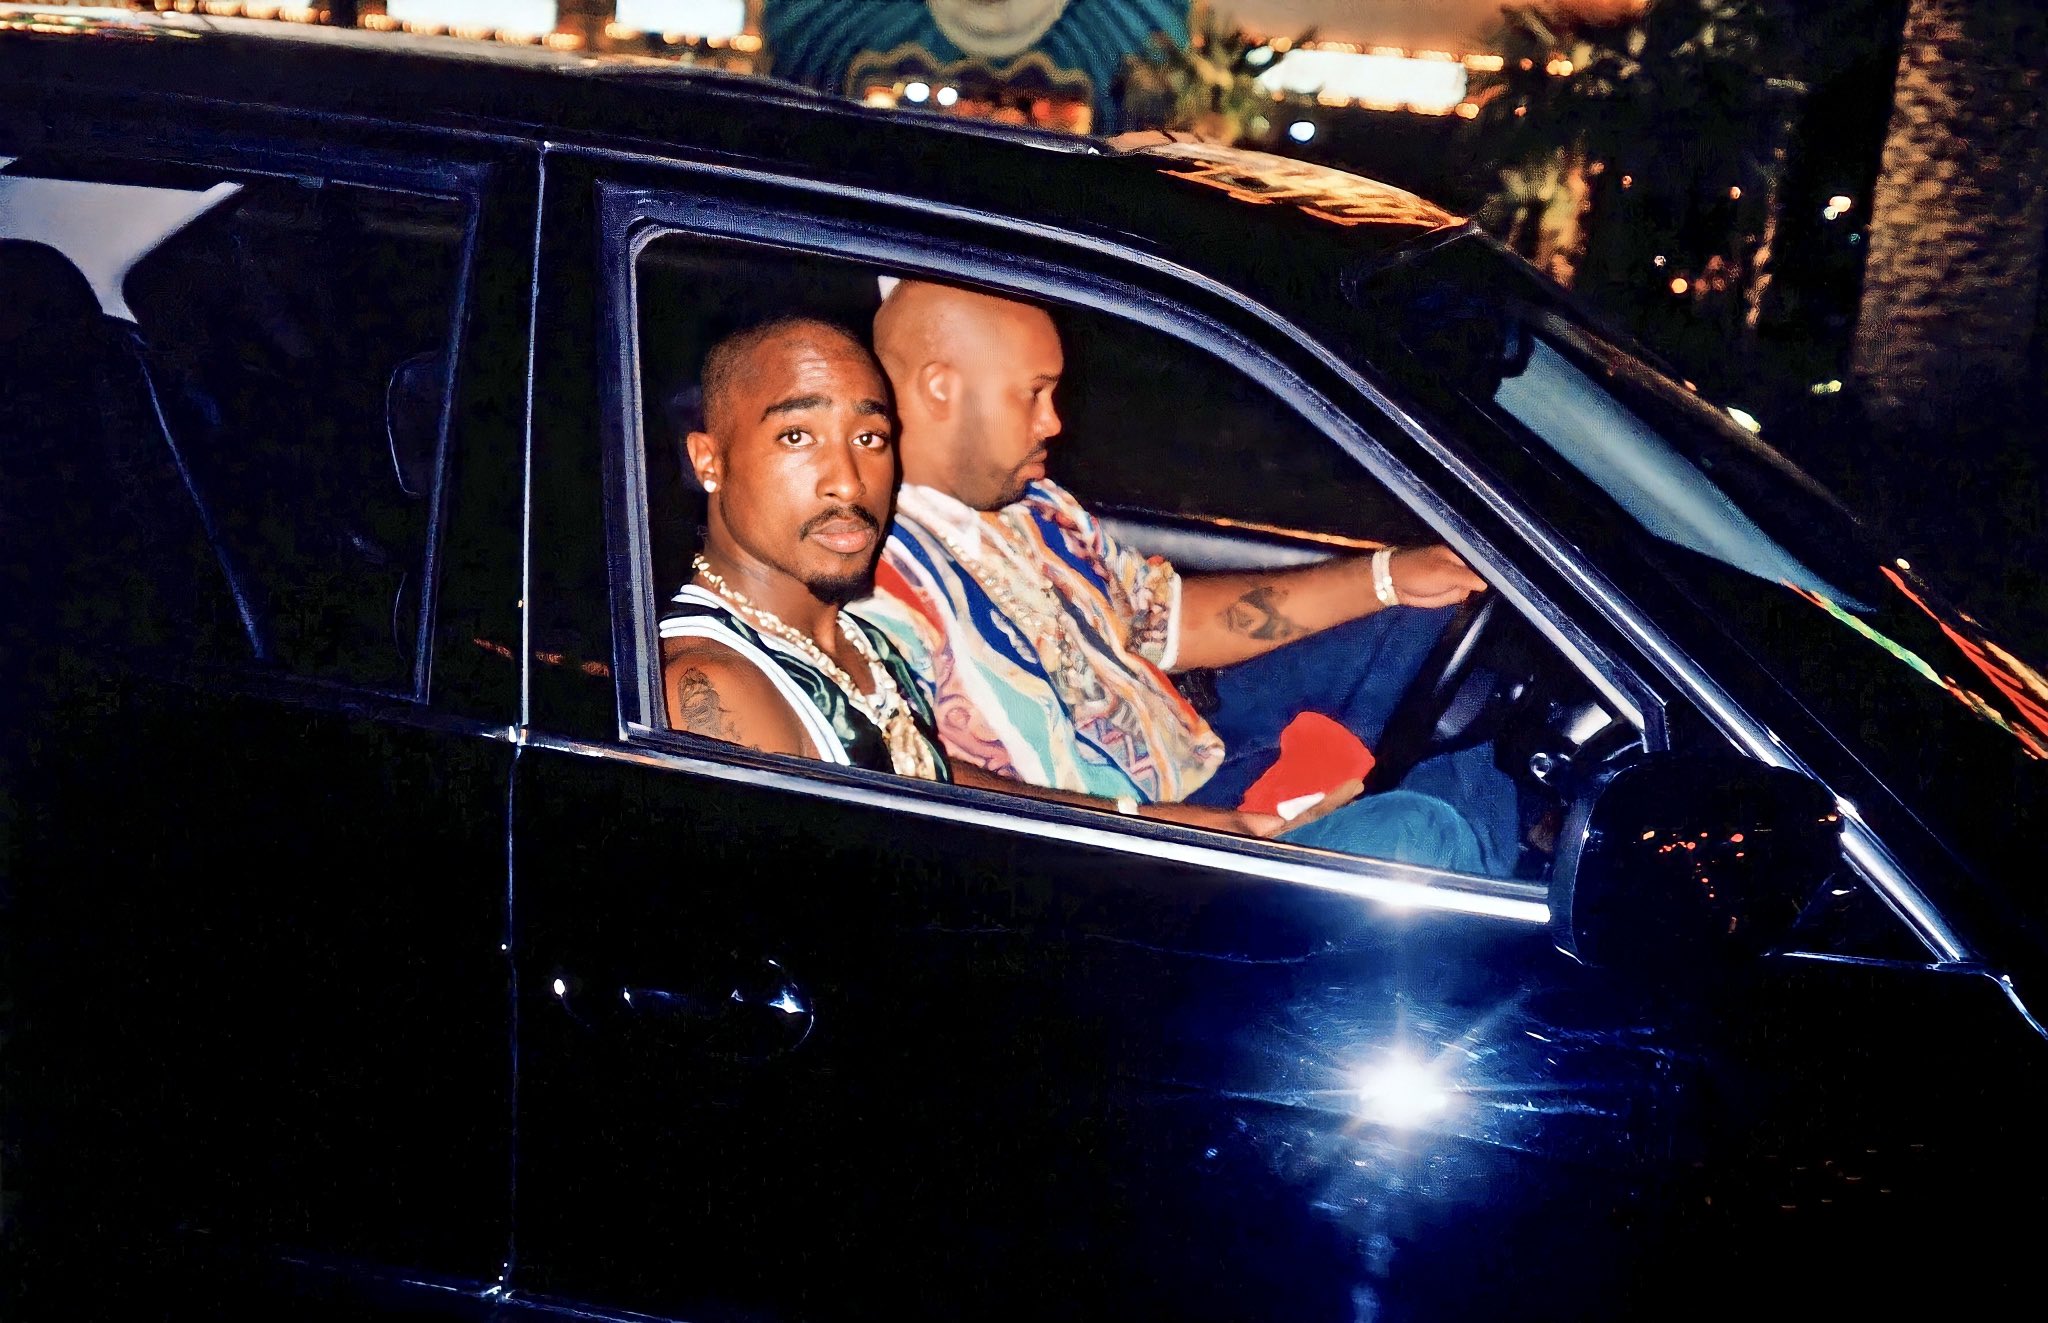 Las Vegas Podcasters Offer $100K Reward For Information That Leads To Arrest Of Tupac’s Killer